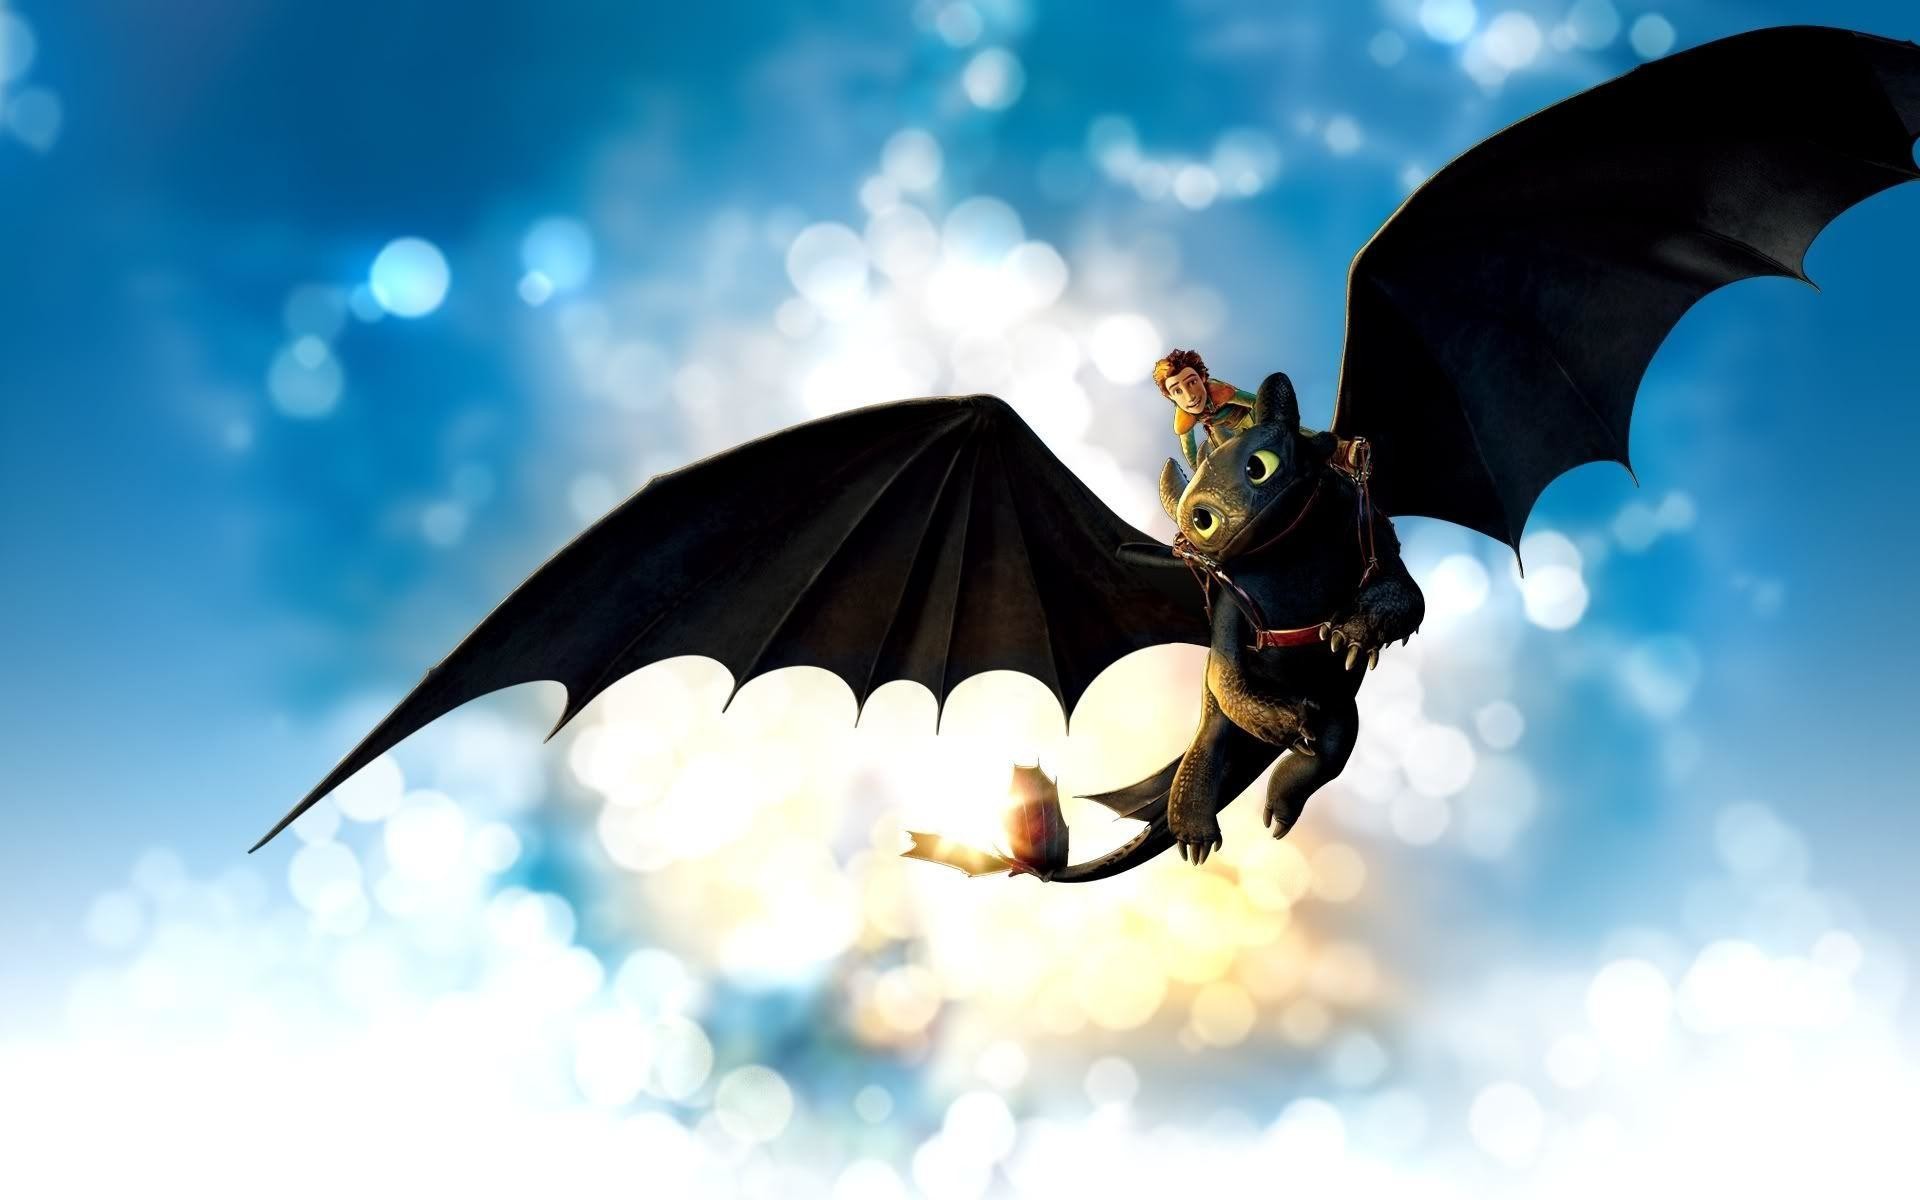 1920x1200 Toothless Wallpapers - Full HD wallpaper search